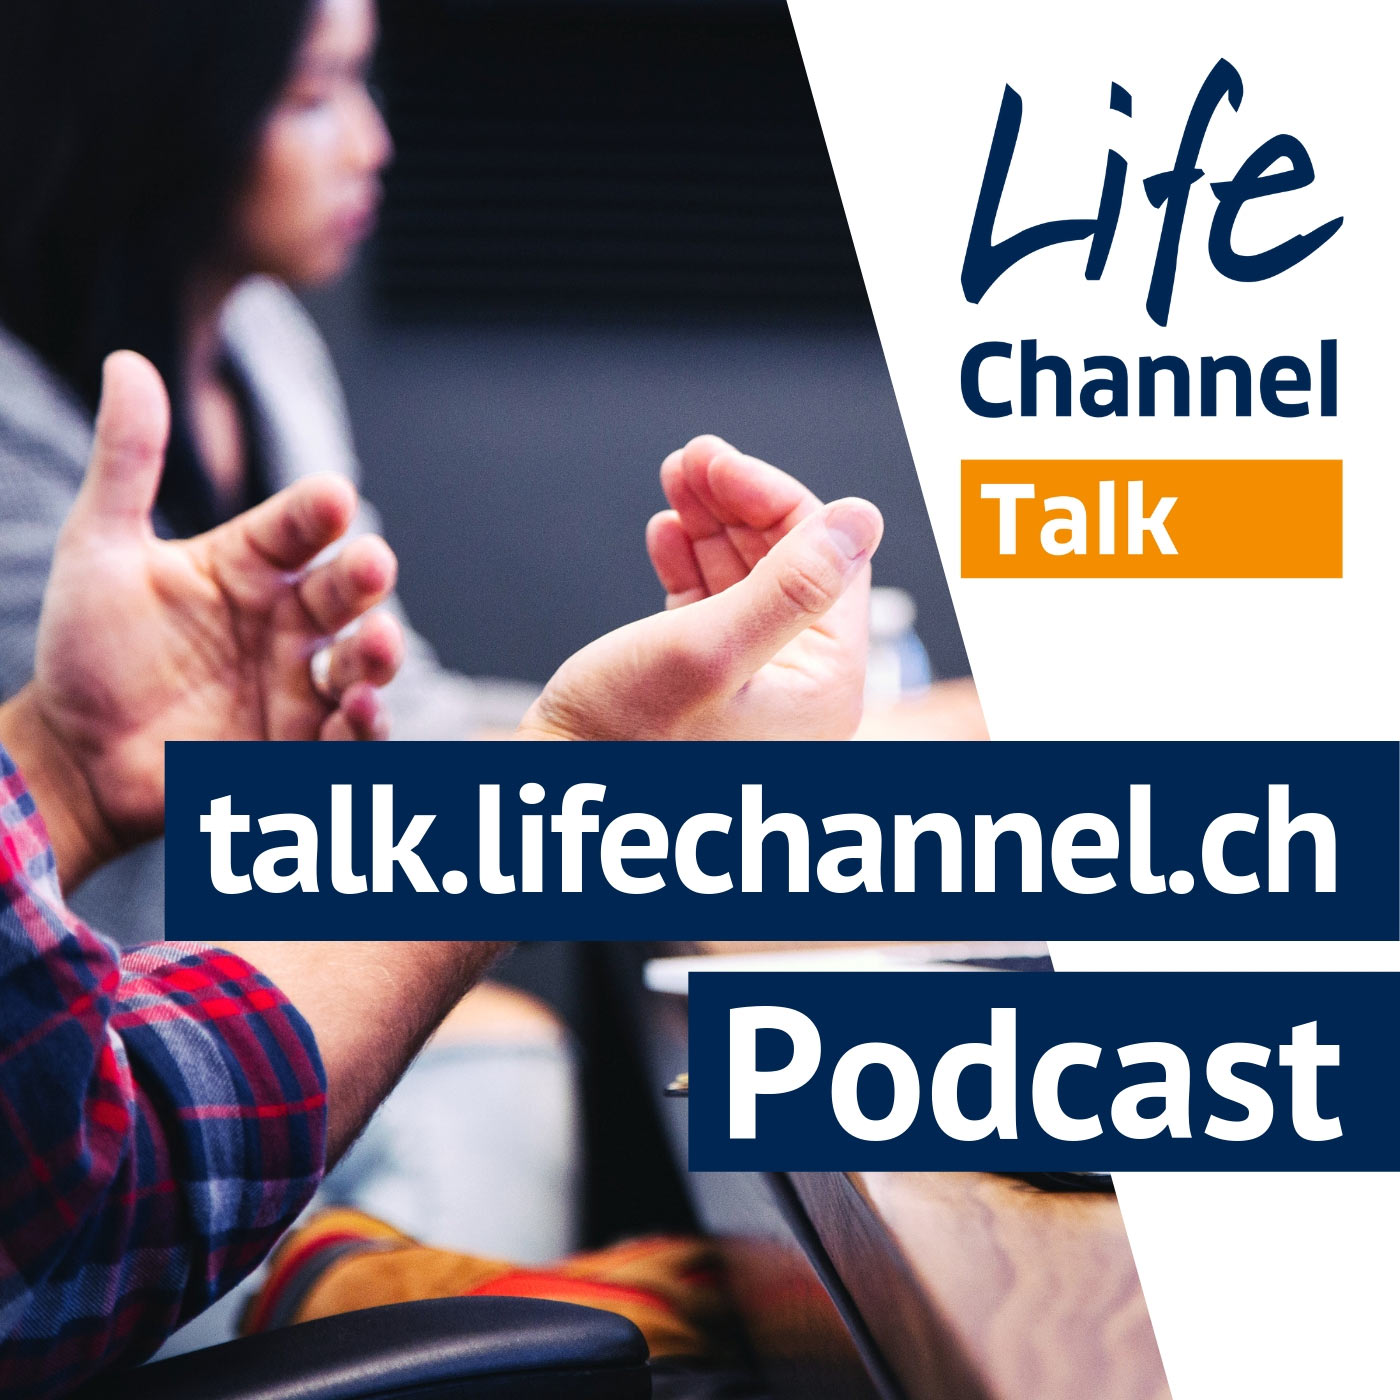 Podcast Life Channel Talk | (c) ERF Medien